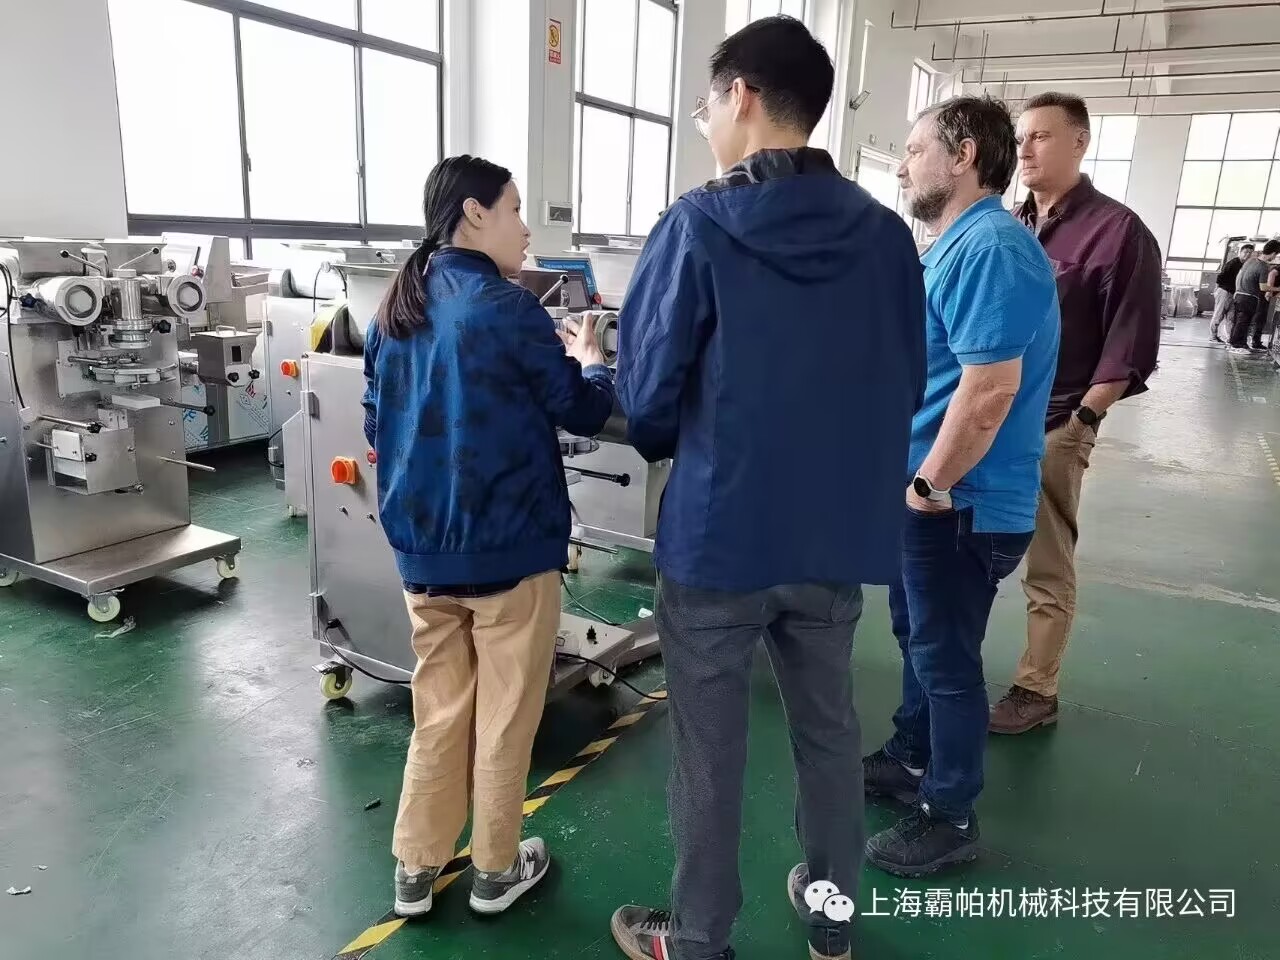 Israeli customers come to visit our factory